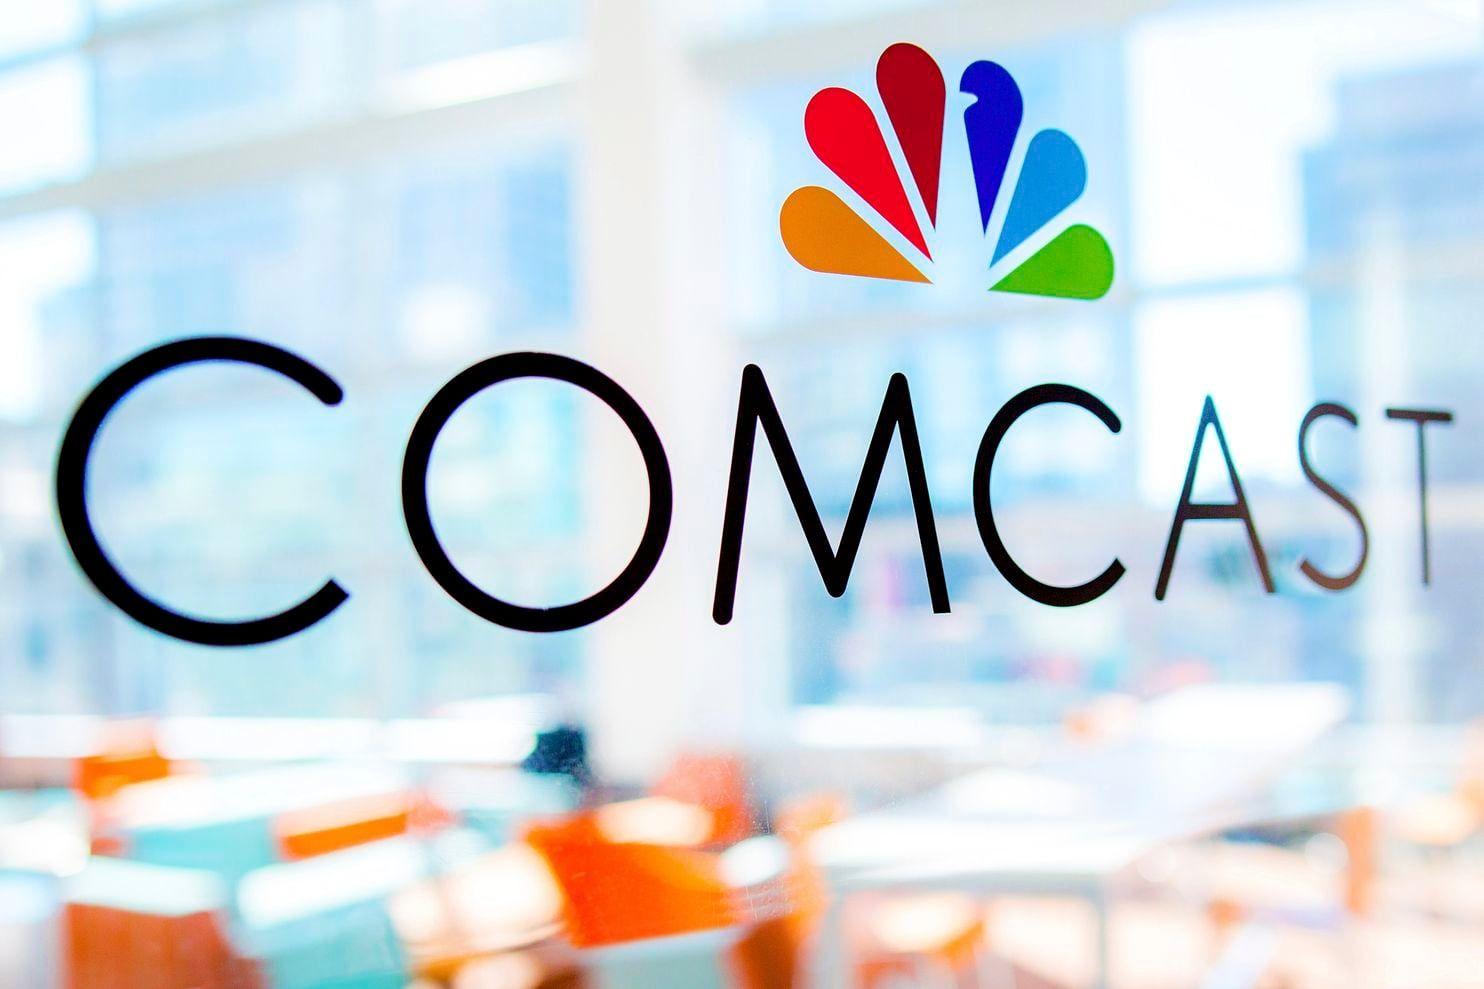 American Cable Television Company Logo - Small cable companies want DOJ to reinvestigate Comcast's merger ...